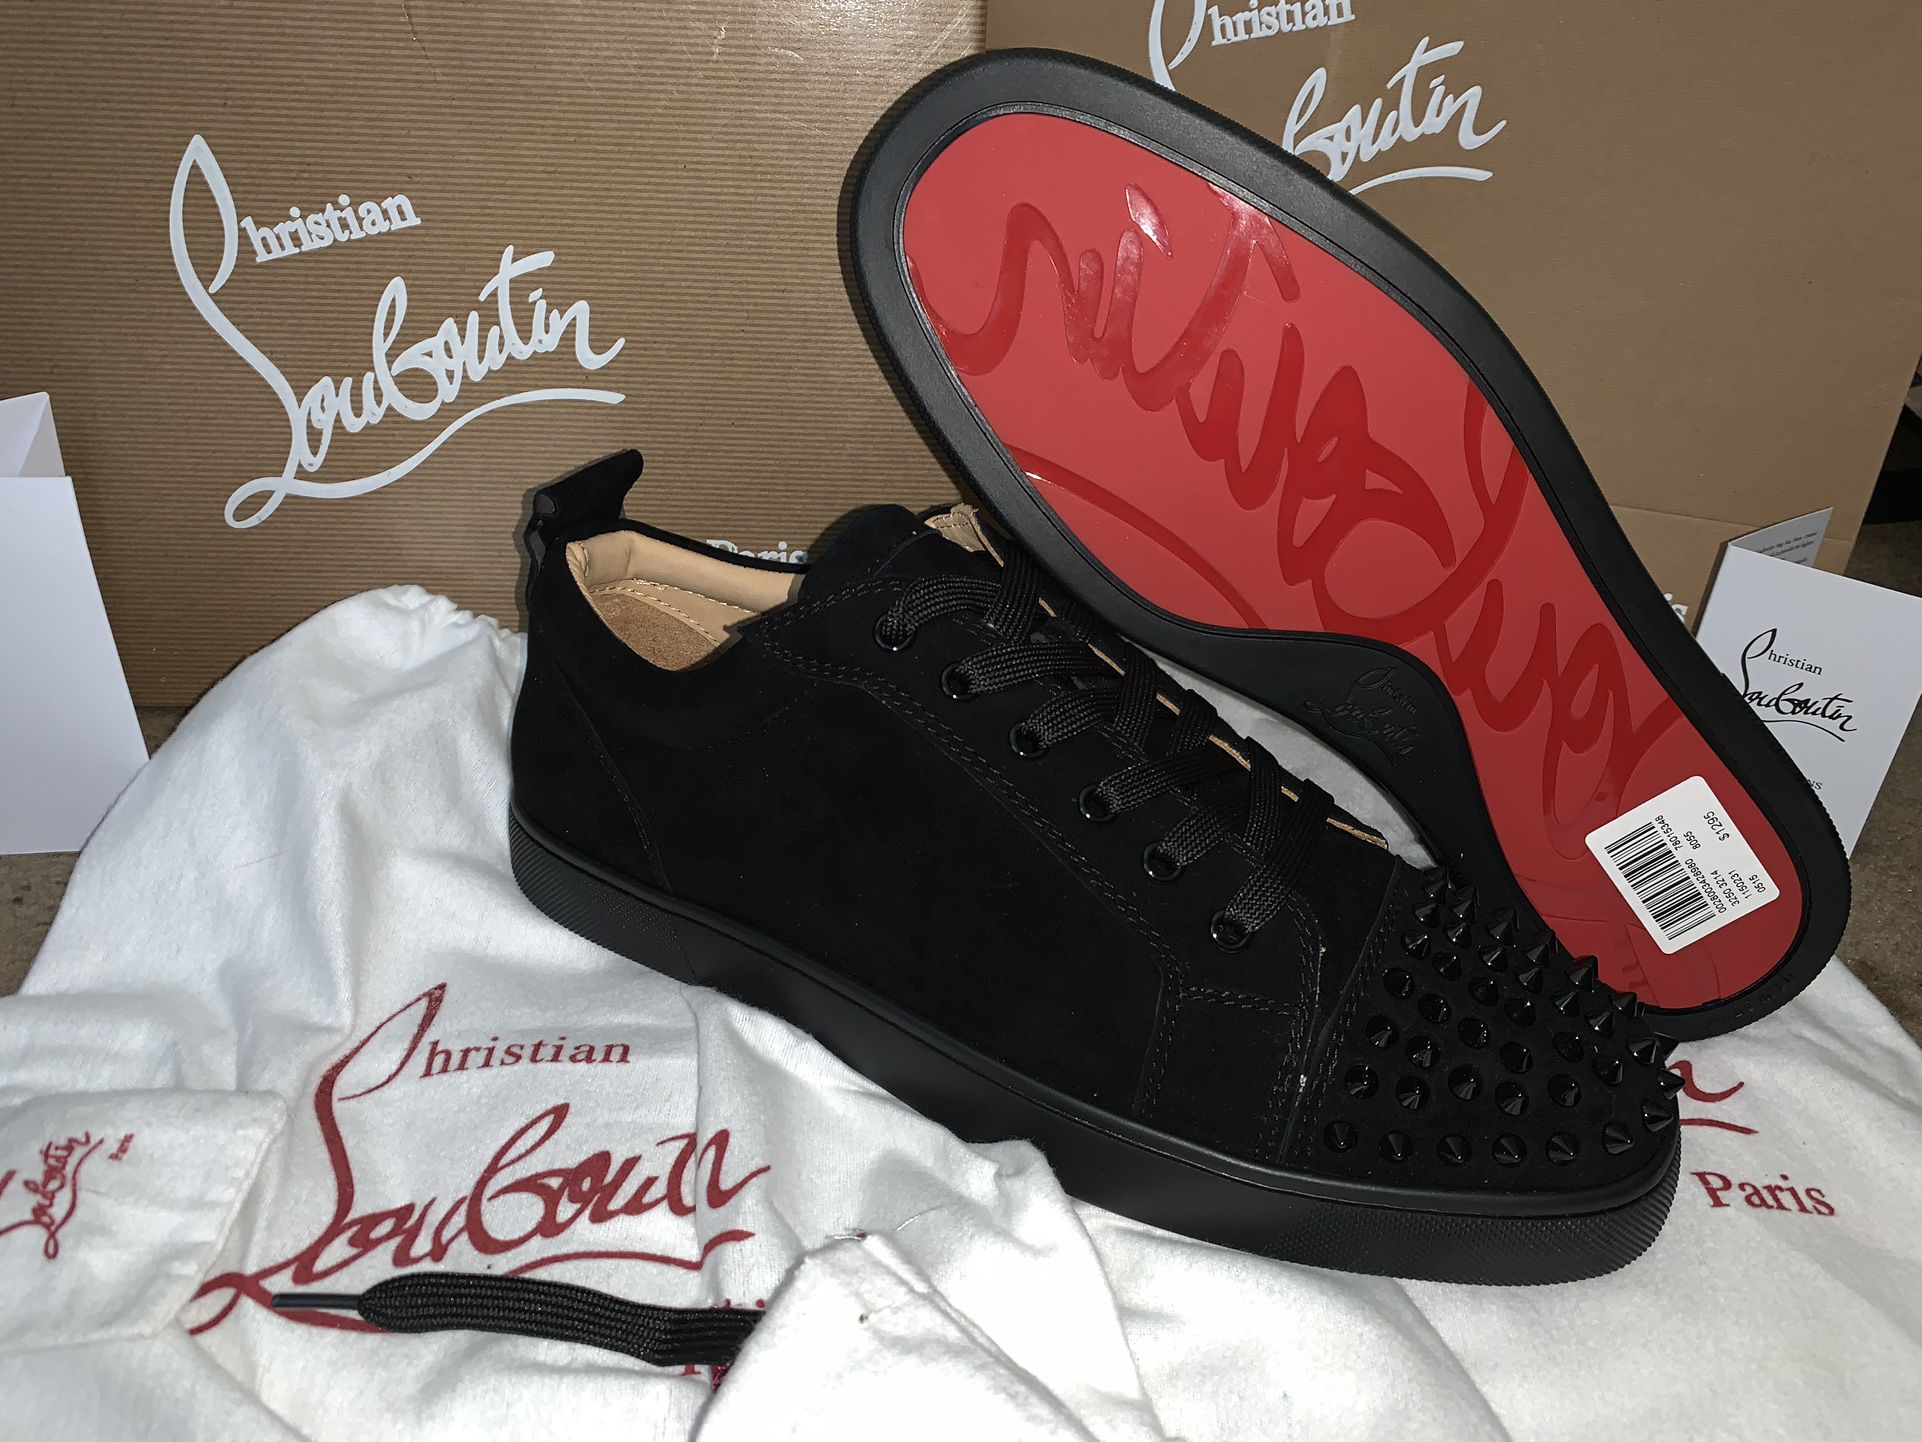 CL black Red Bottom Sneakers (ON SALE) for Sale in Milpitas, CA - OfferUp